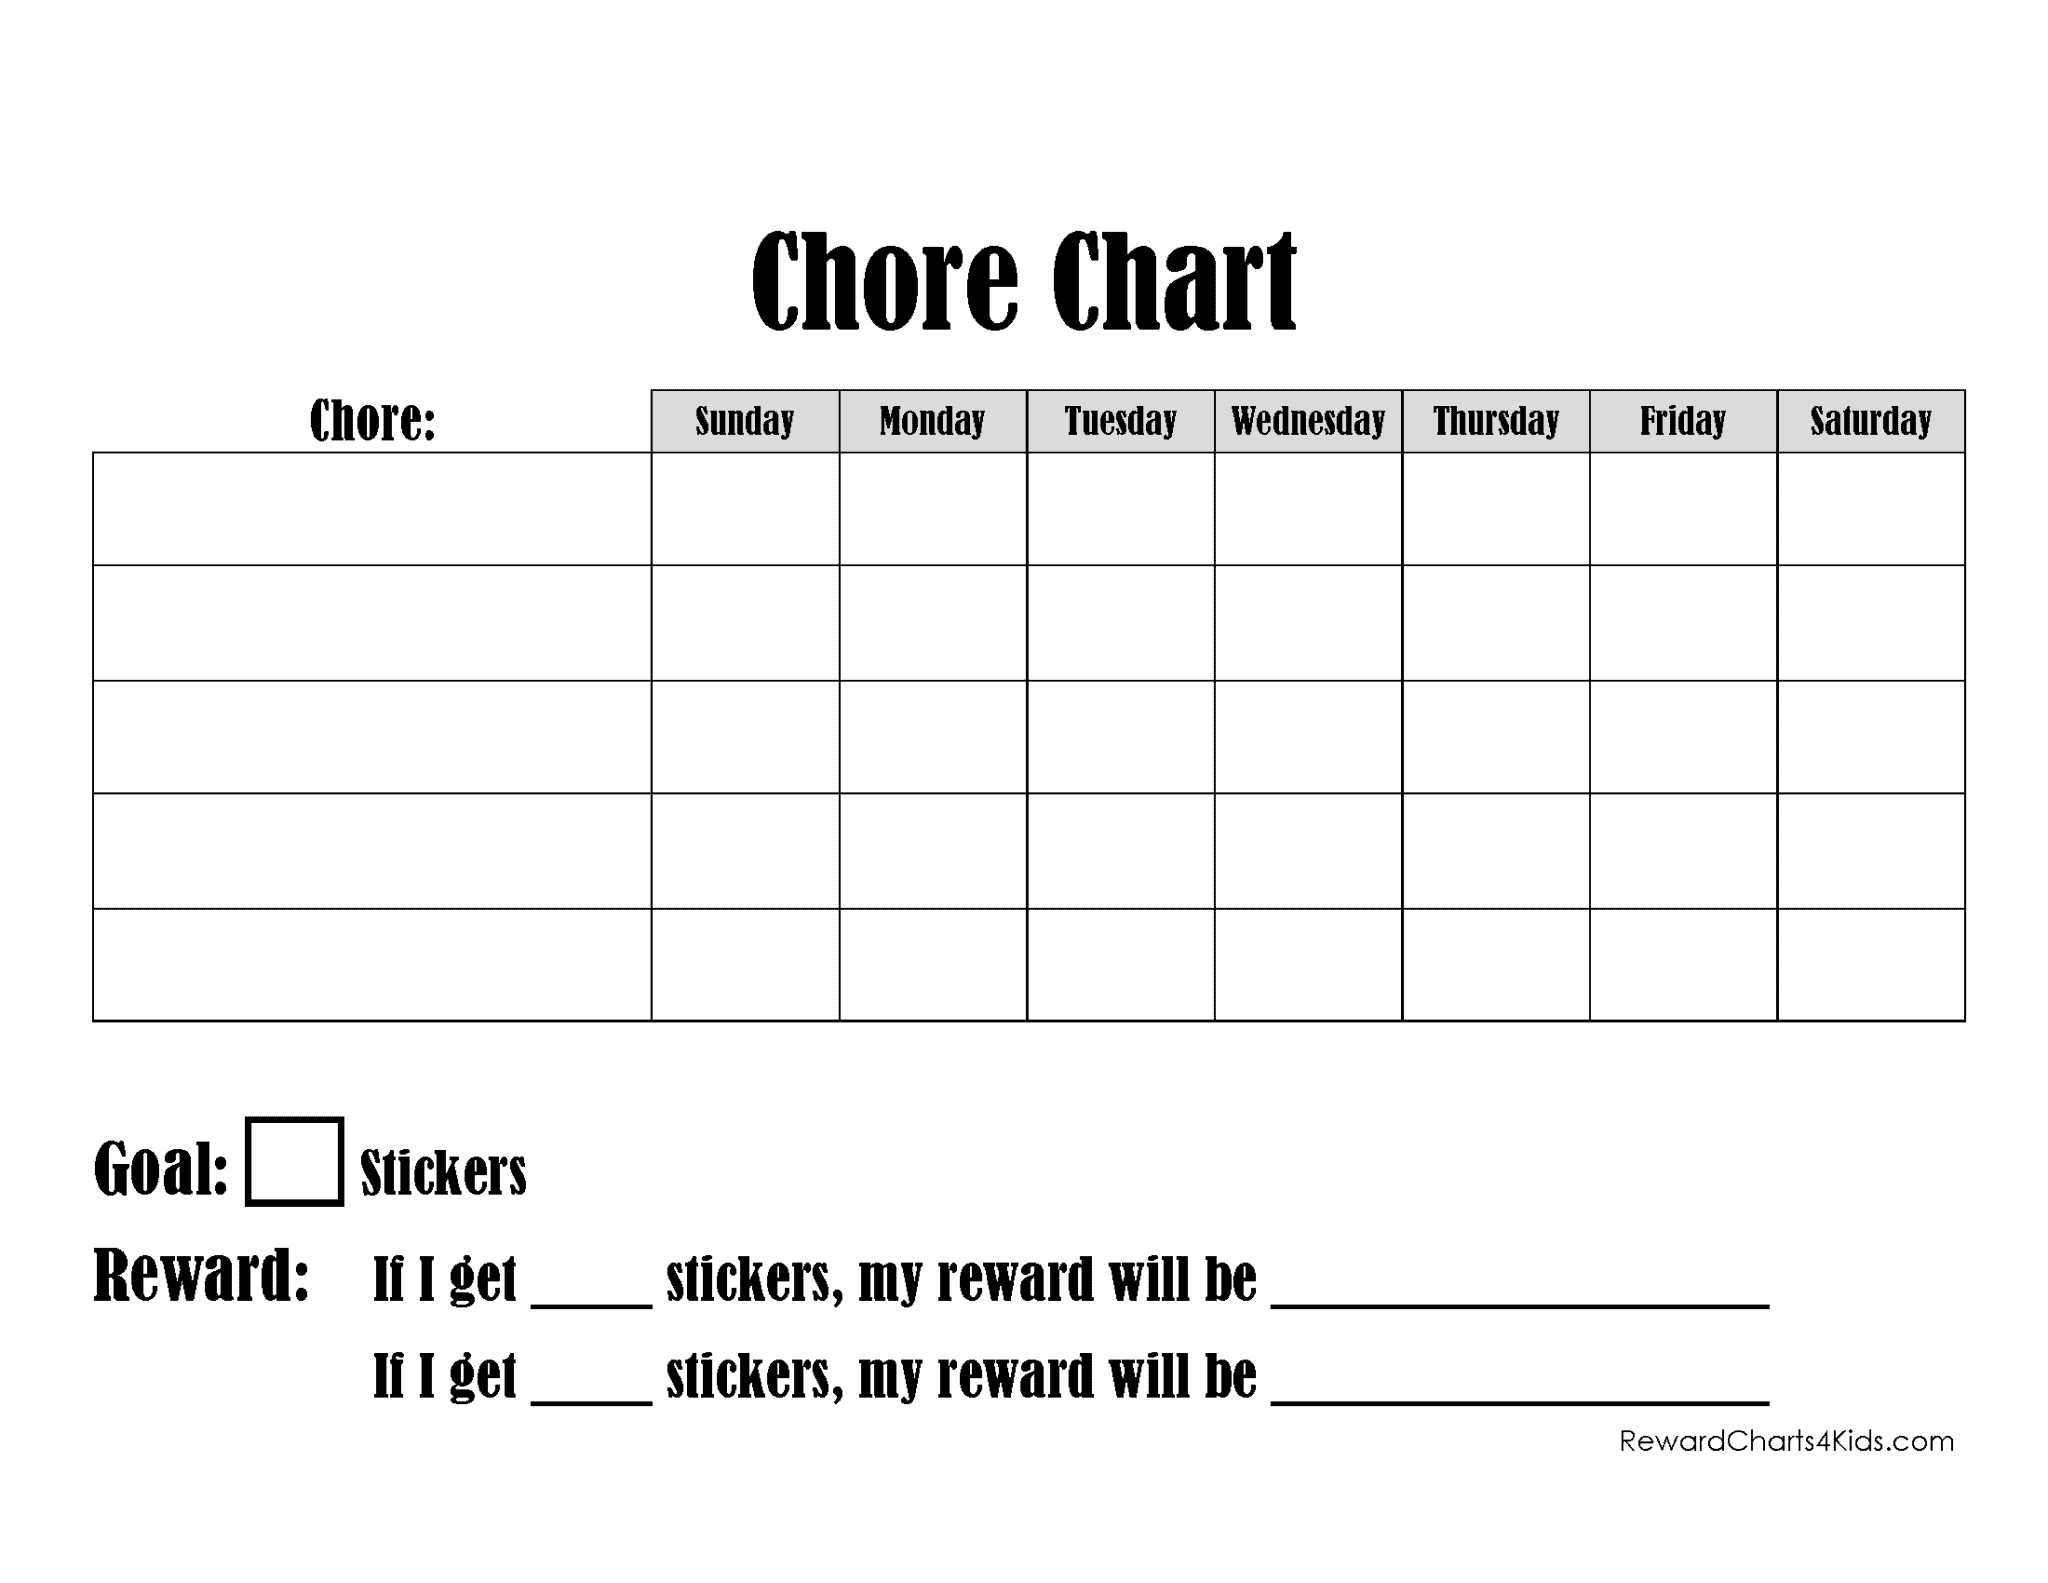 free-printable-chore-chart-for-kids-customize-online-print-at-home